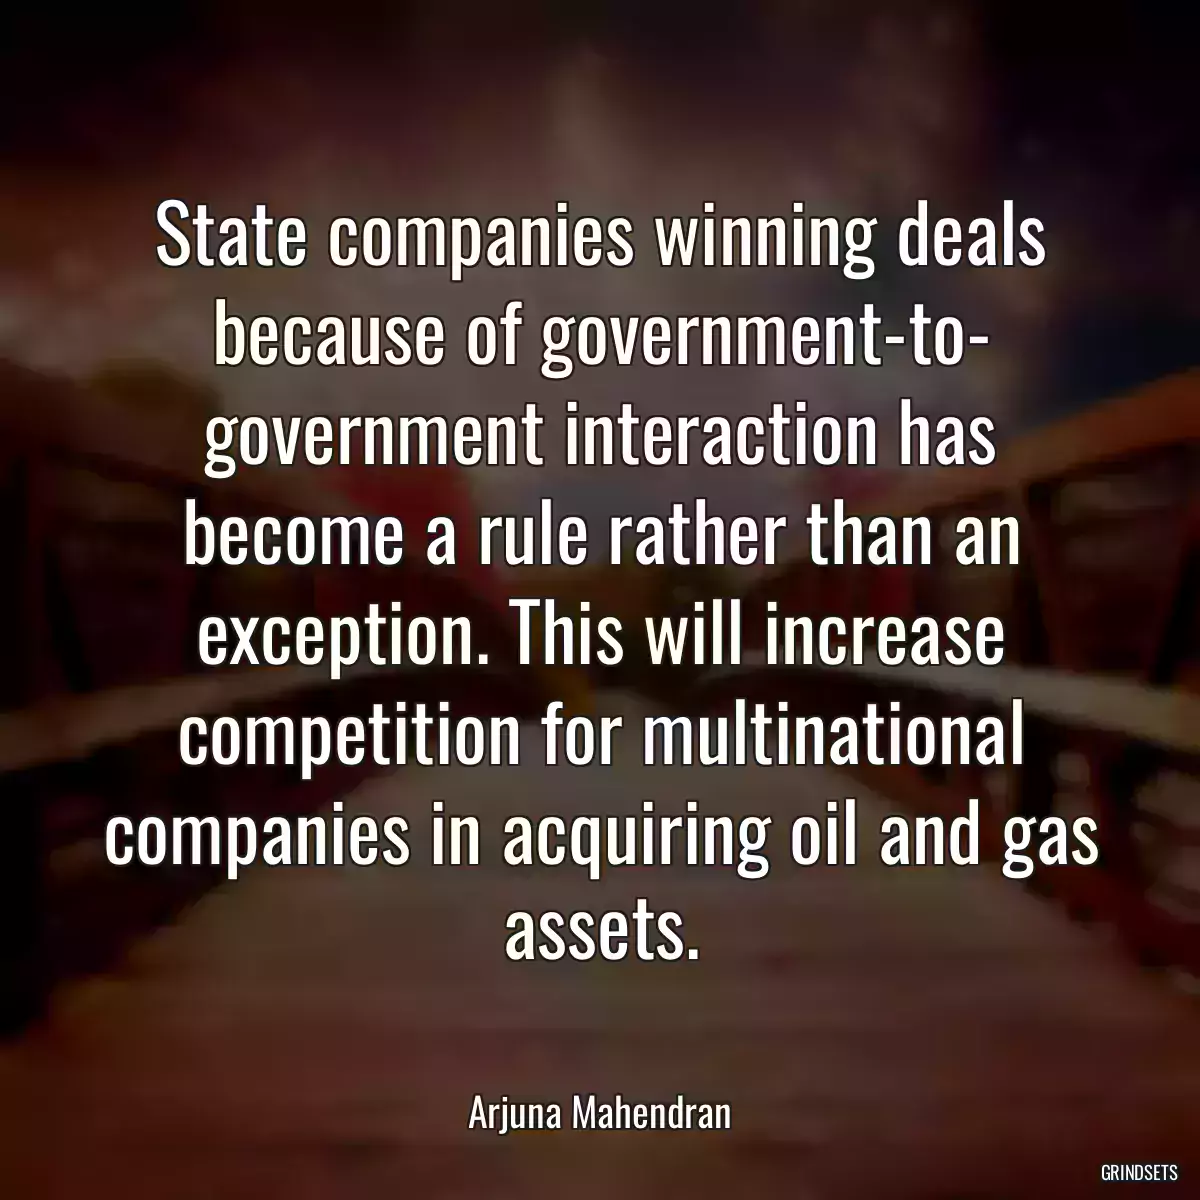 State companies winning deals because of government-to- government interaction has become a rule rather than an exception. This will increase competition for multinational companies in acquiring oil and gas assets.